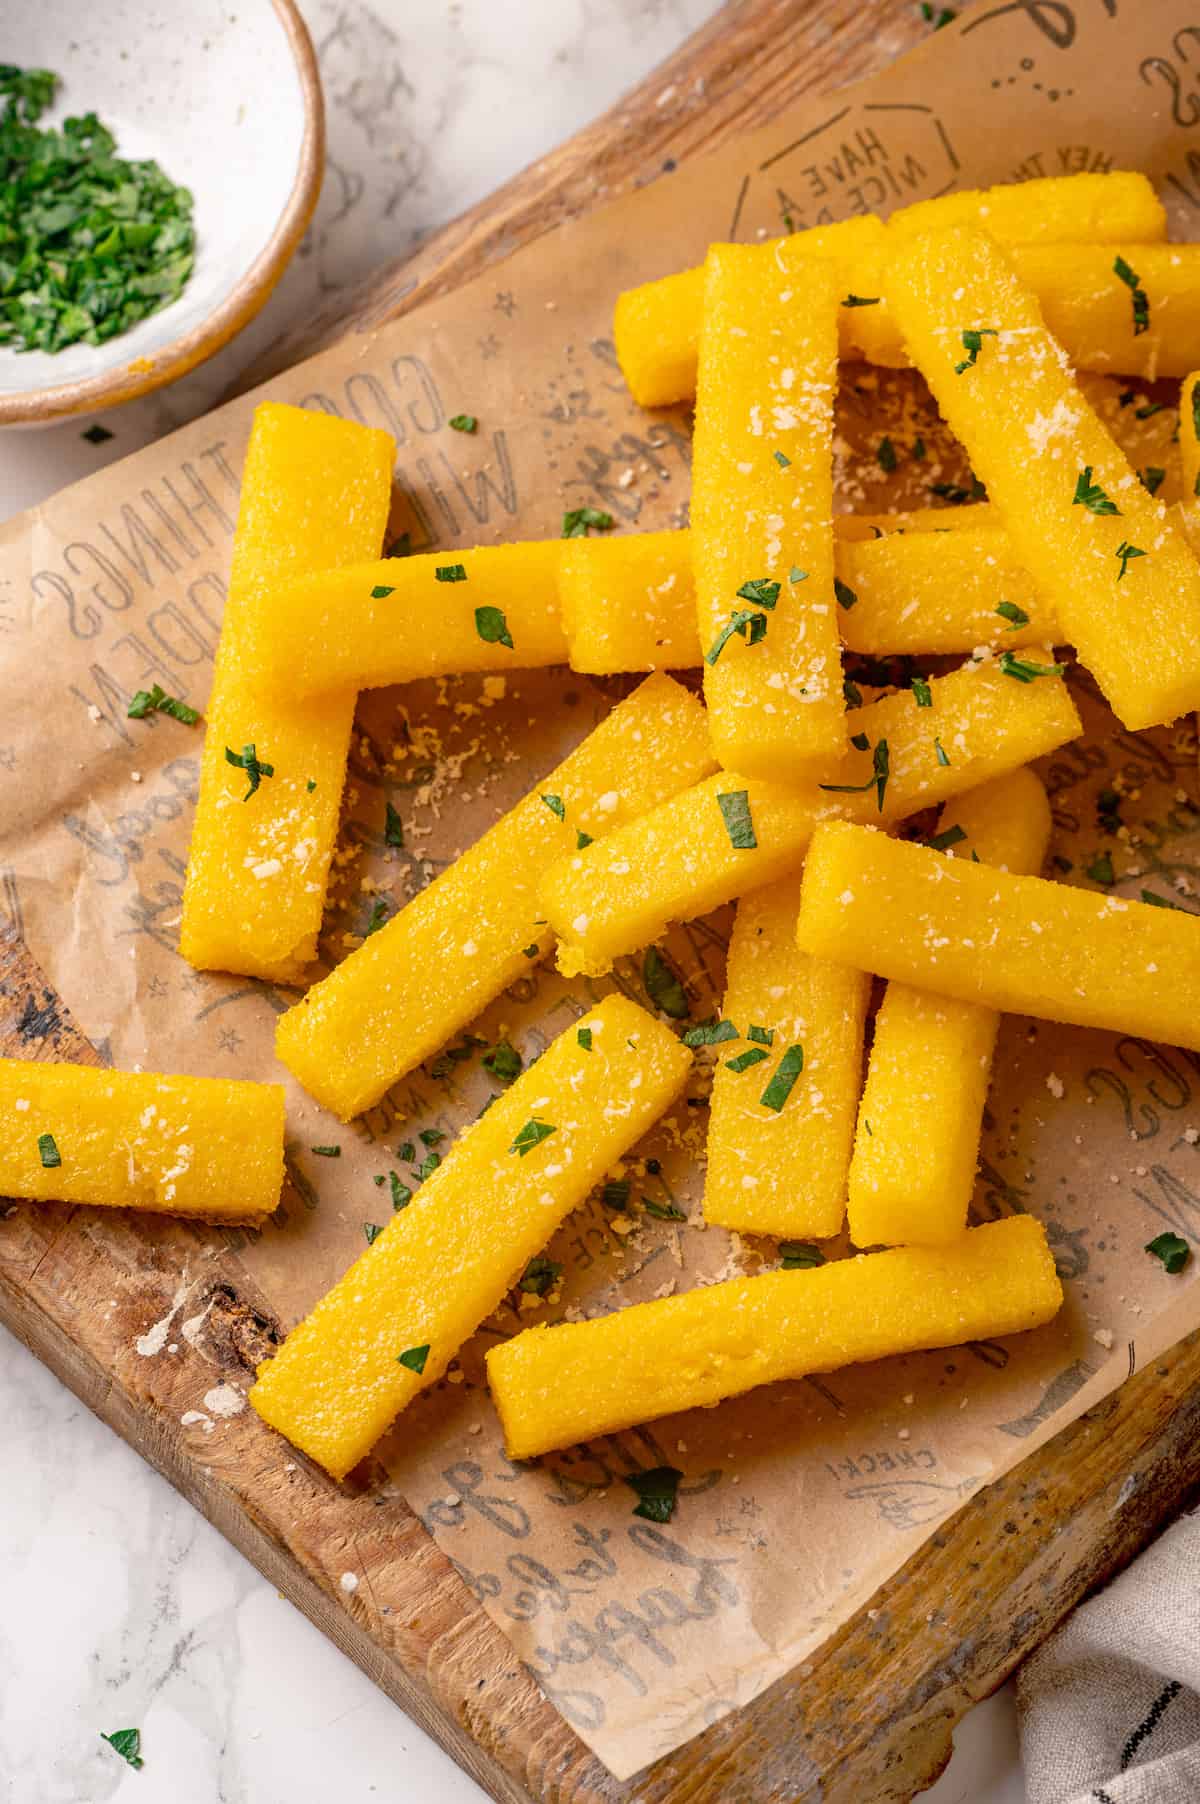 Crispy polenta fries on parchment paper with bowl of parsley in background